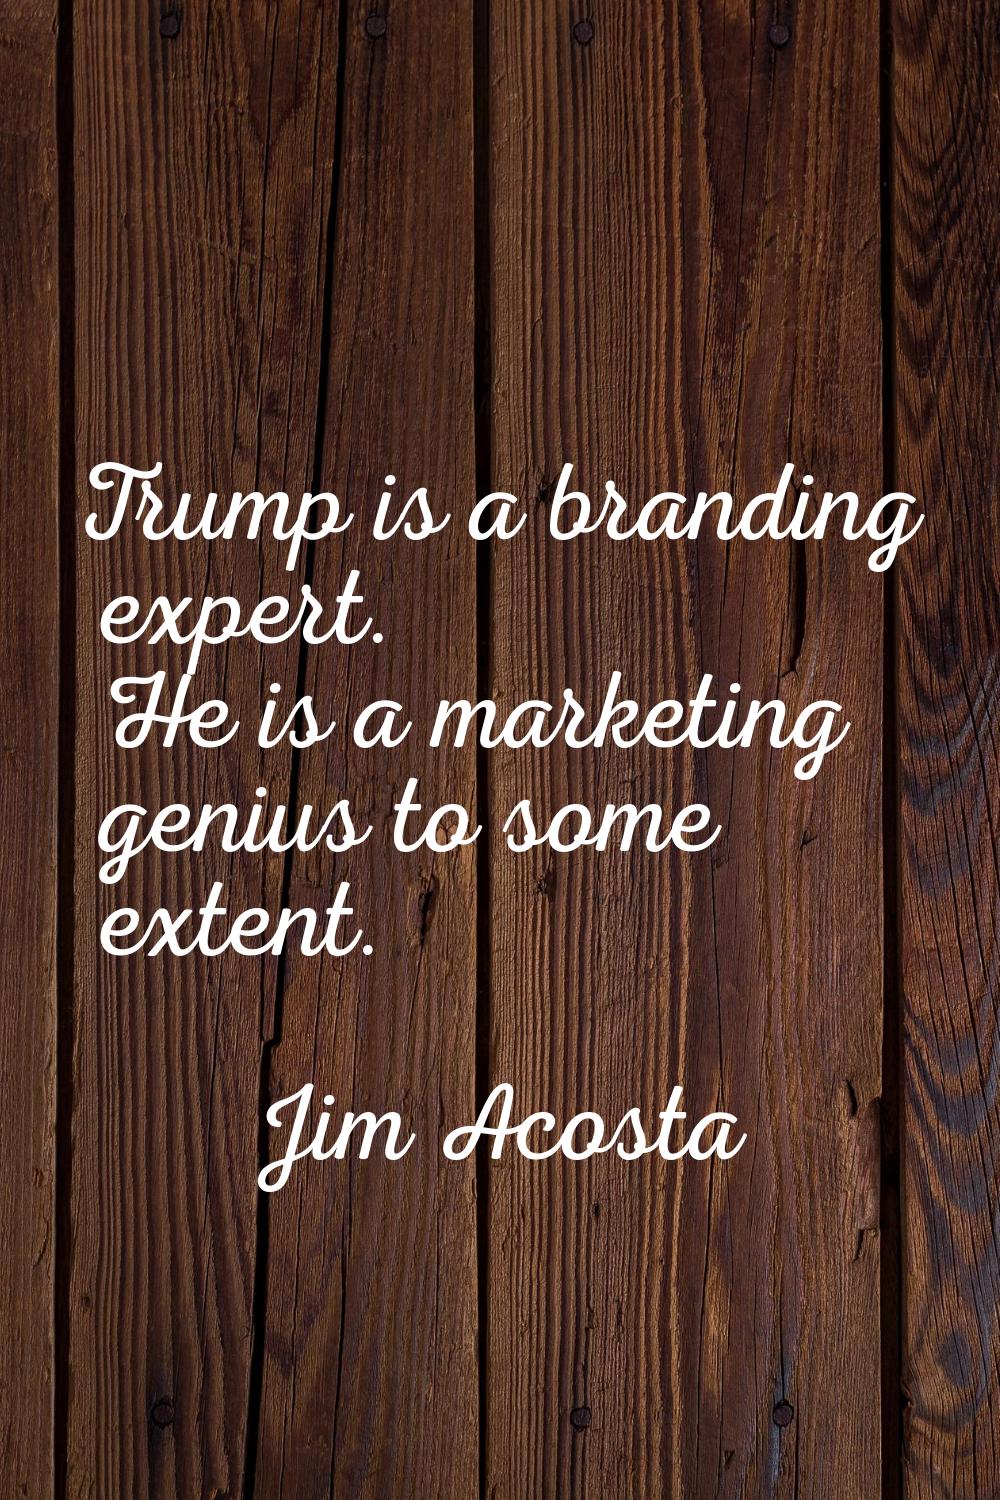 Trump is a branding expert. He is a marketing genius to some extent.